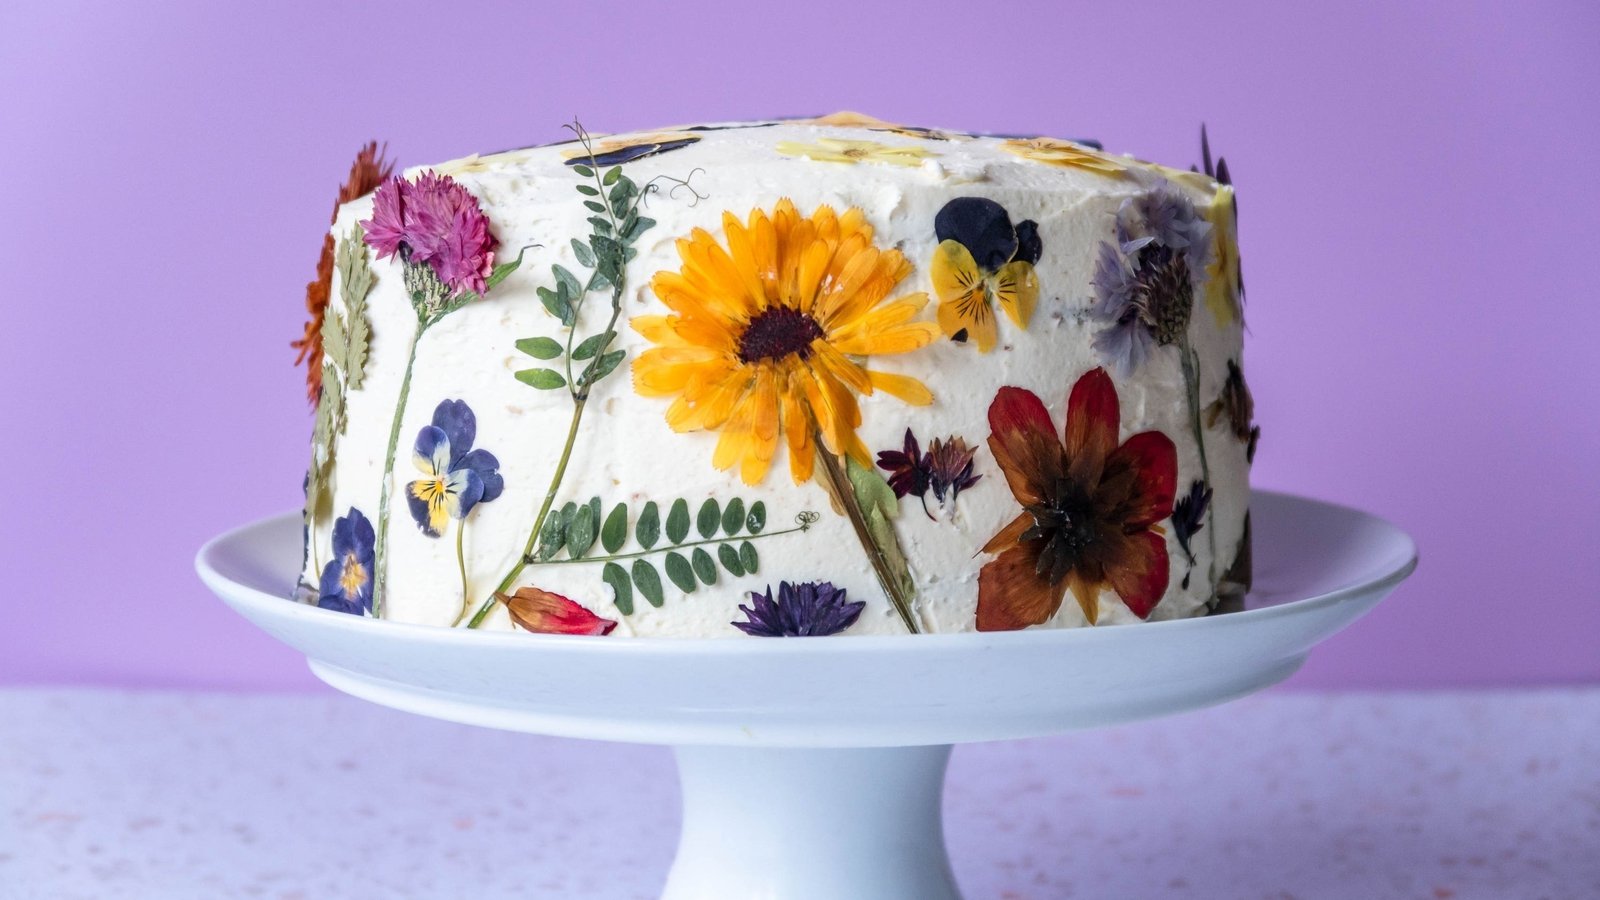 Decorate a cake using edible flowers, Edible flower cakes